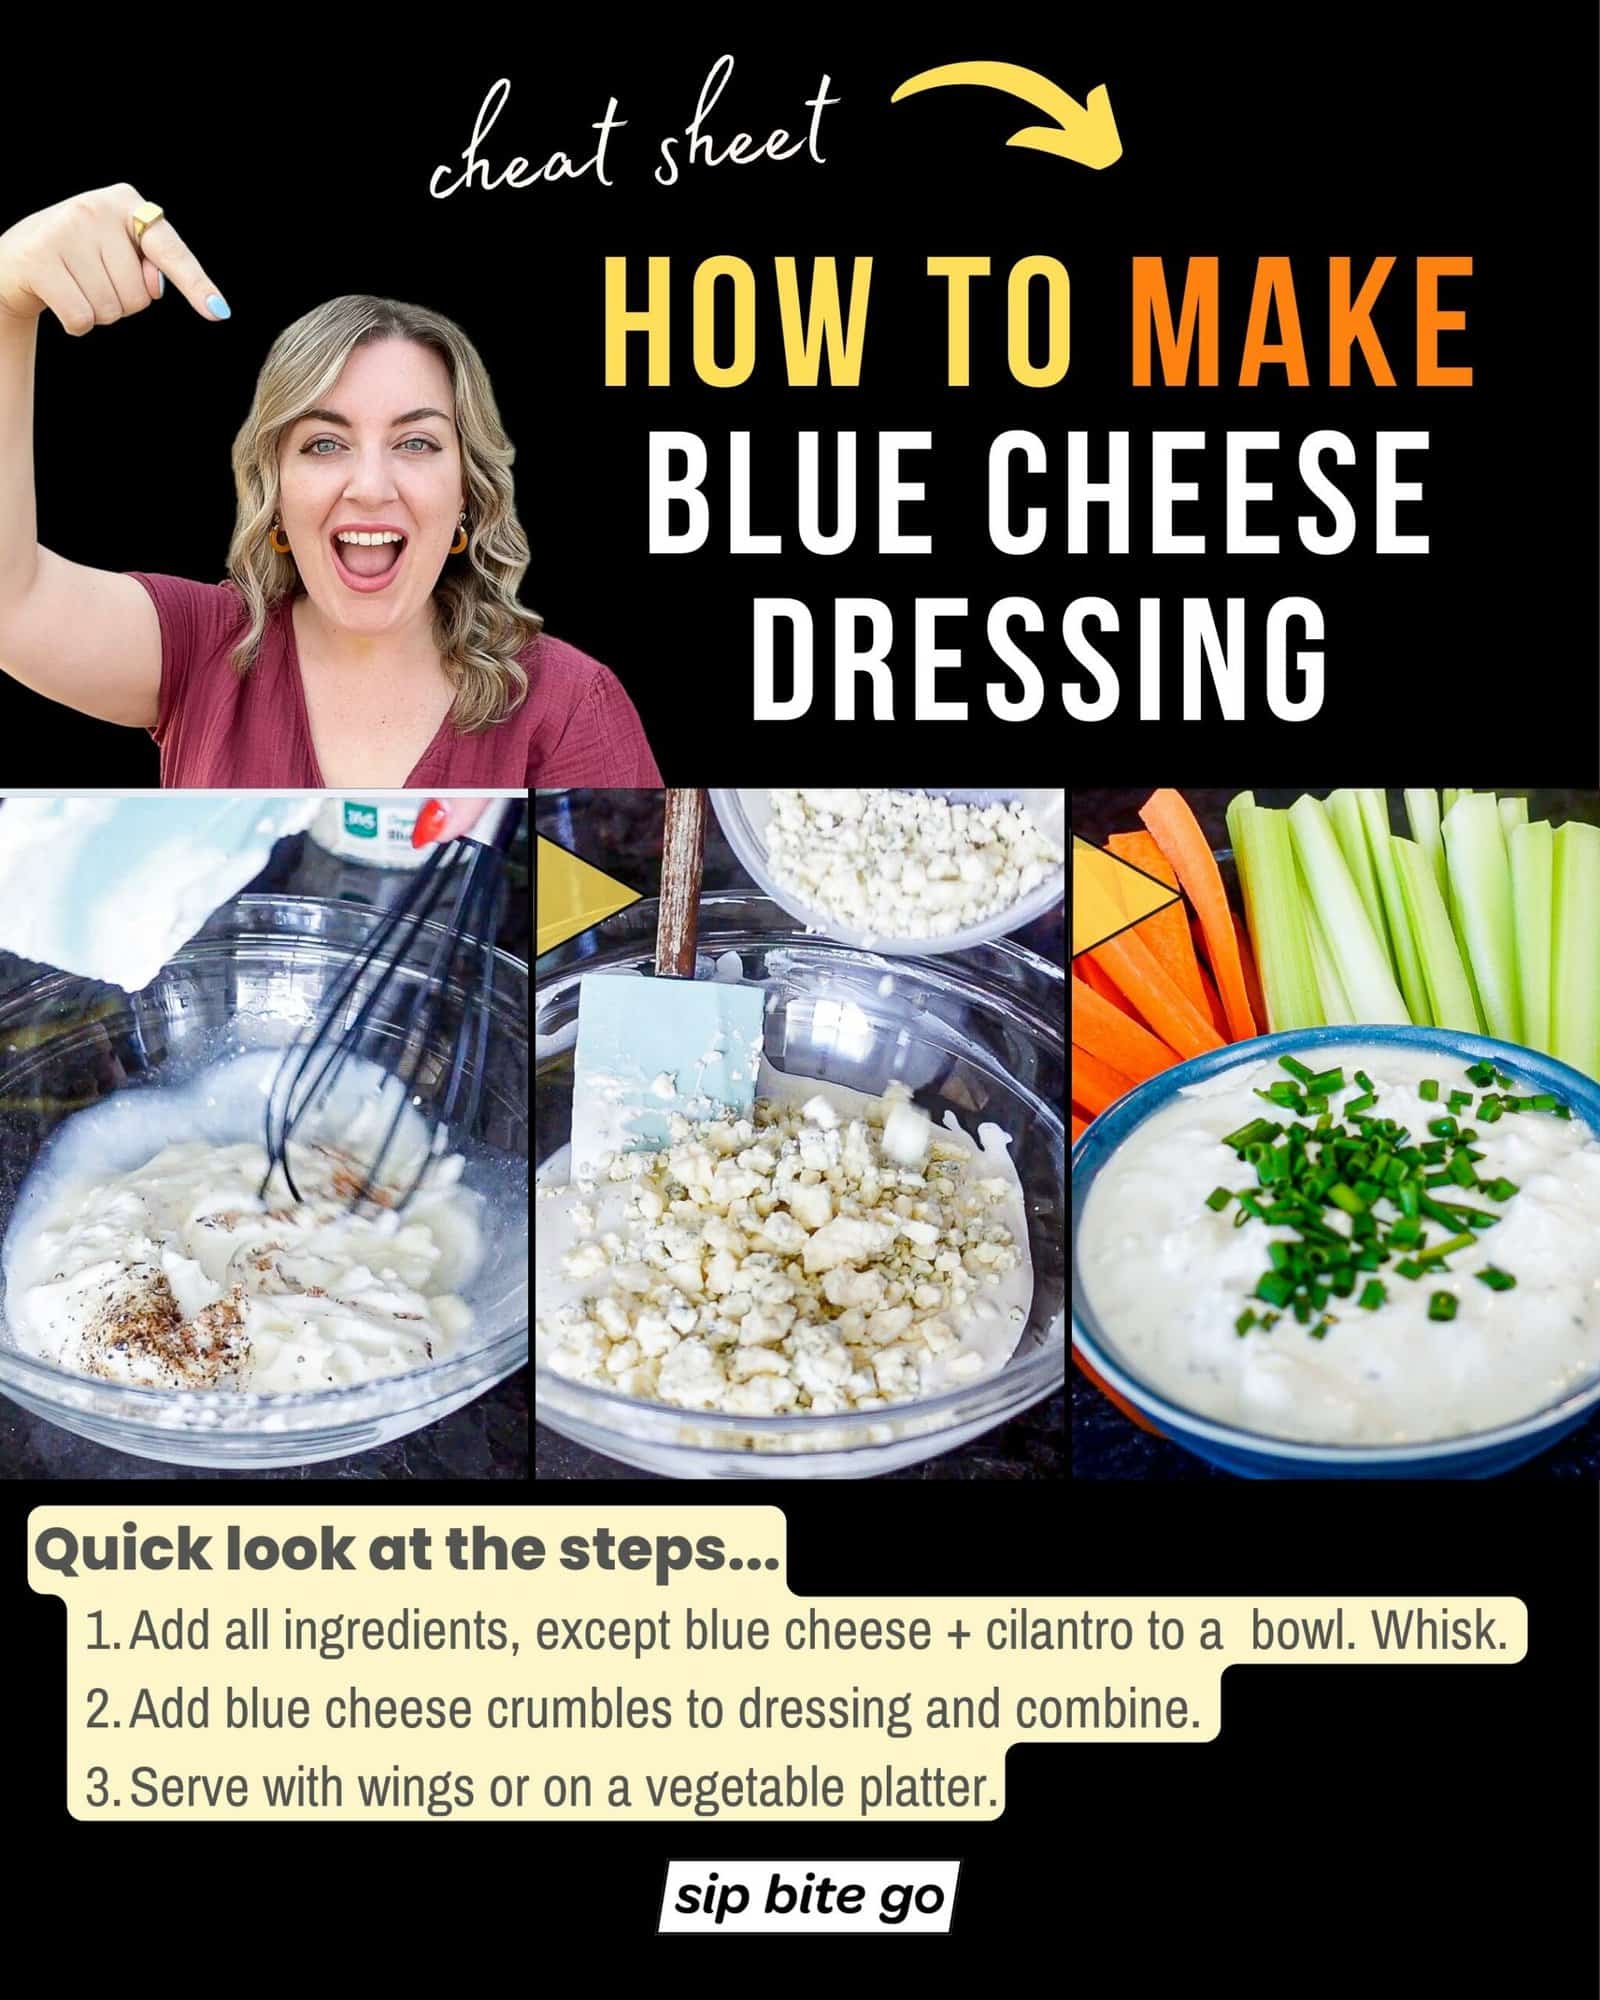 Infographic demonstrating steps with captions for How To Make Blue Cheese Dressing Recipe with Sip Bite Go logo